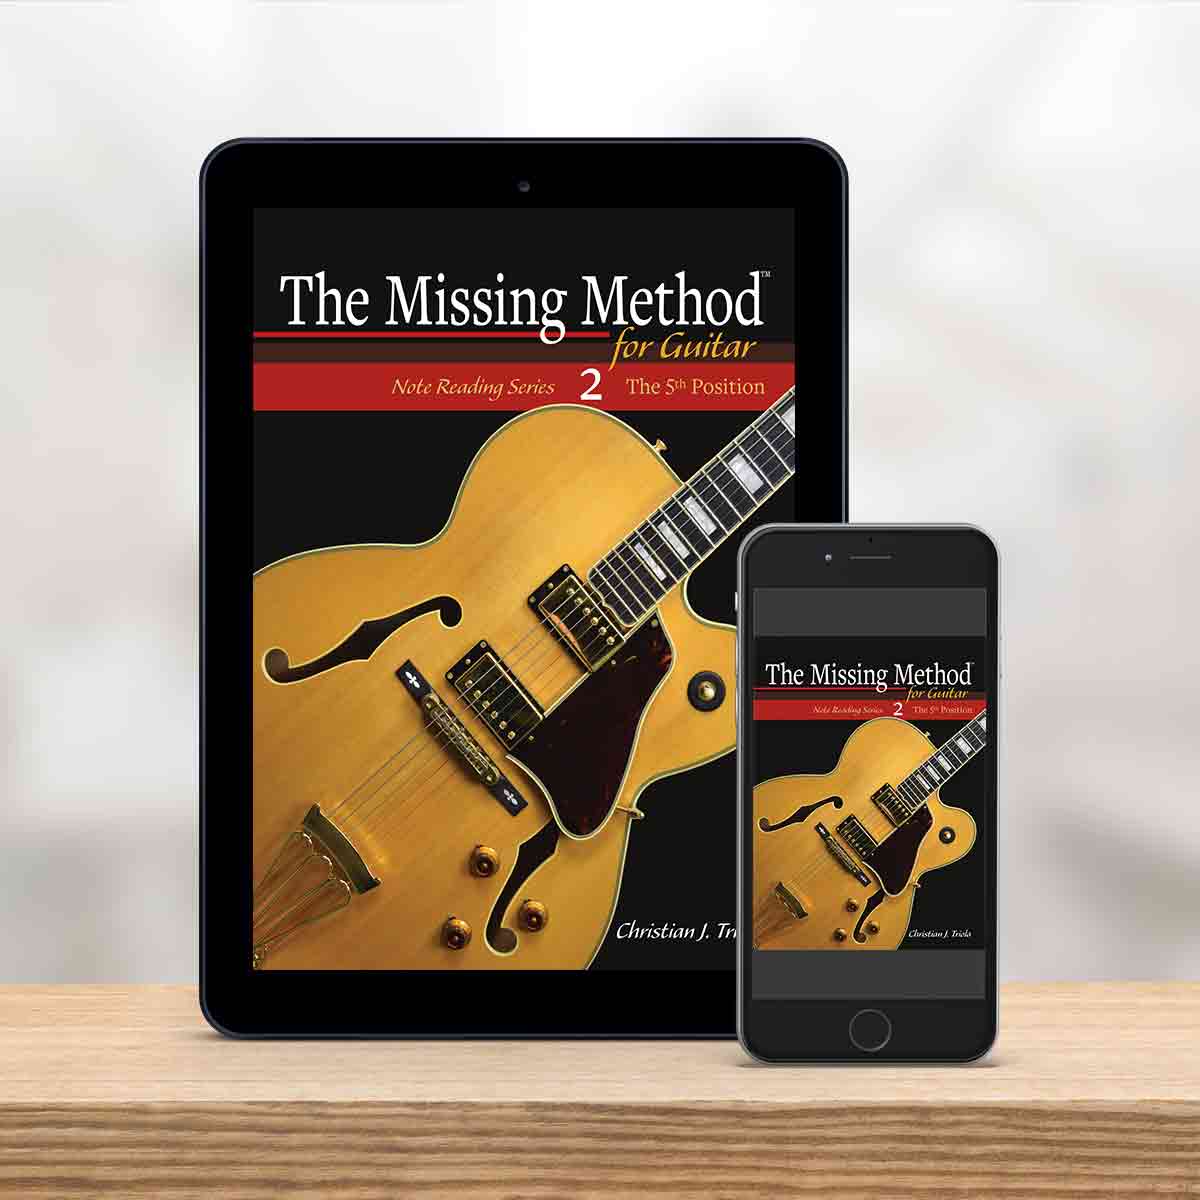 Digital Tablet and smartphone showing the cover of The Missing Method for Guitar Note Reading Series Book 2 by Christian Triola